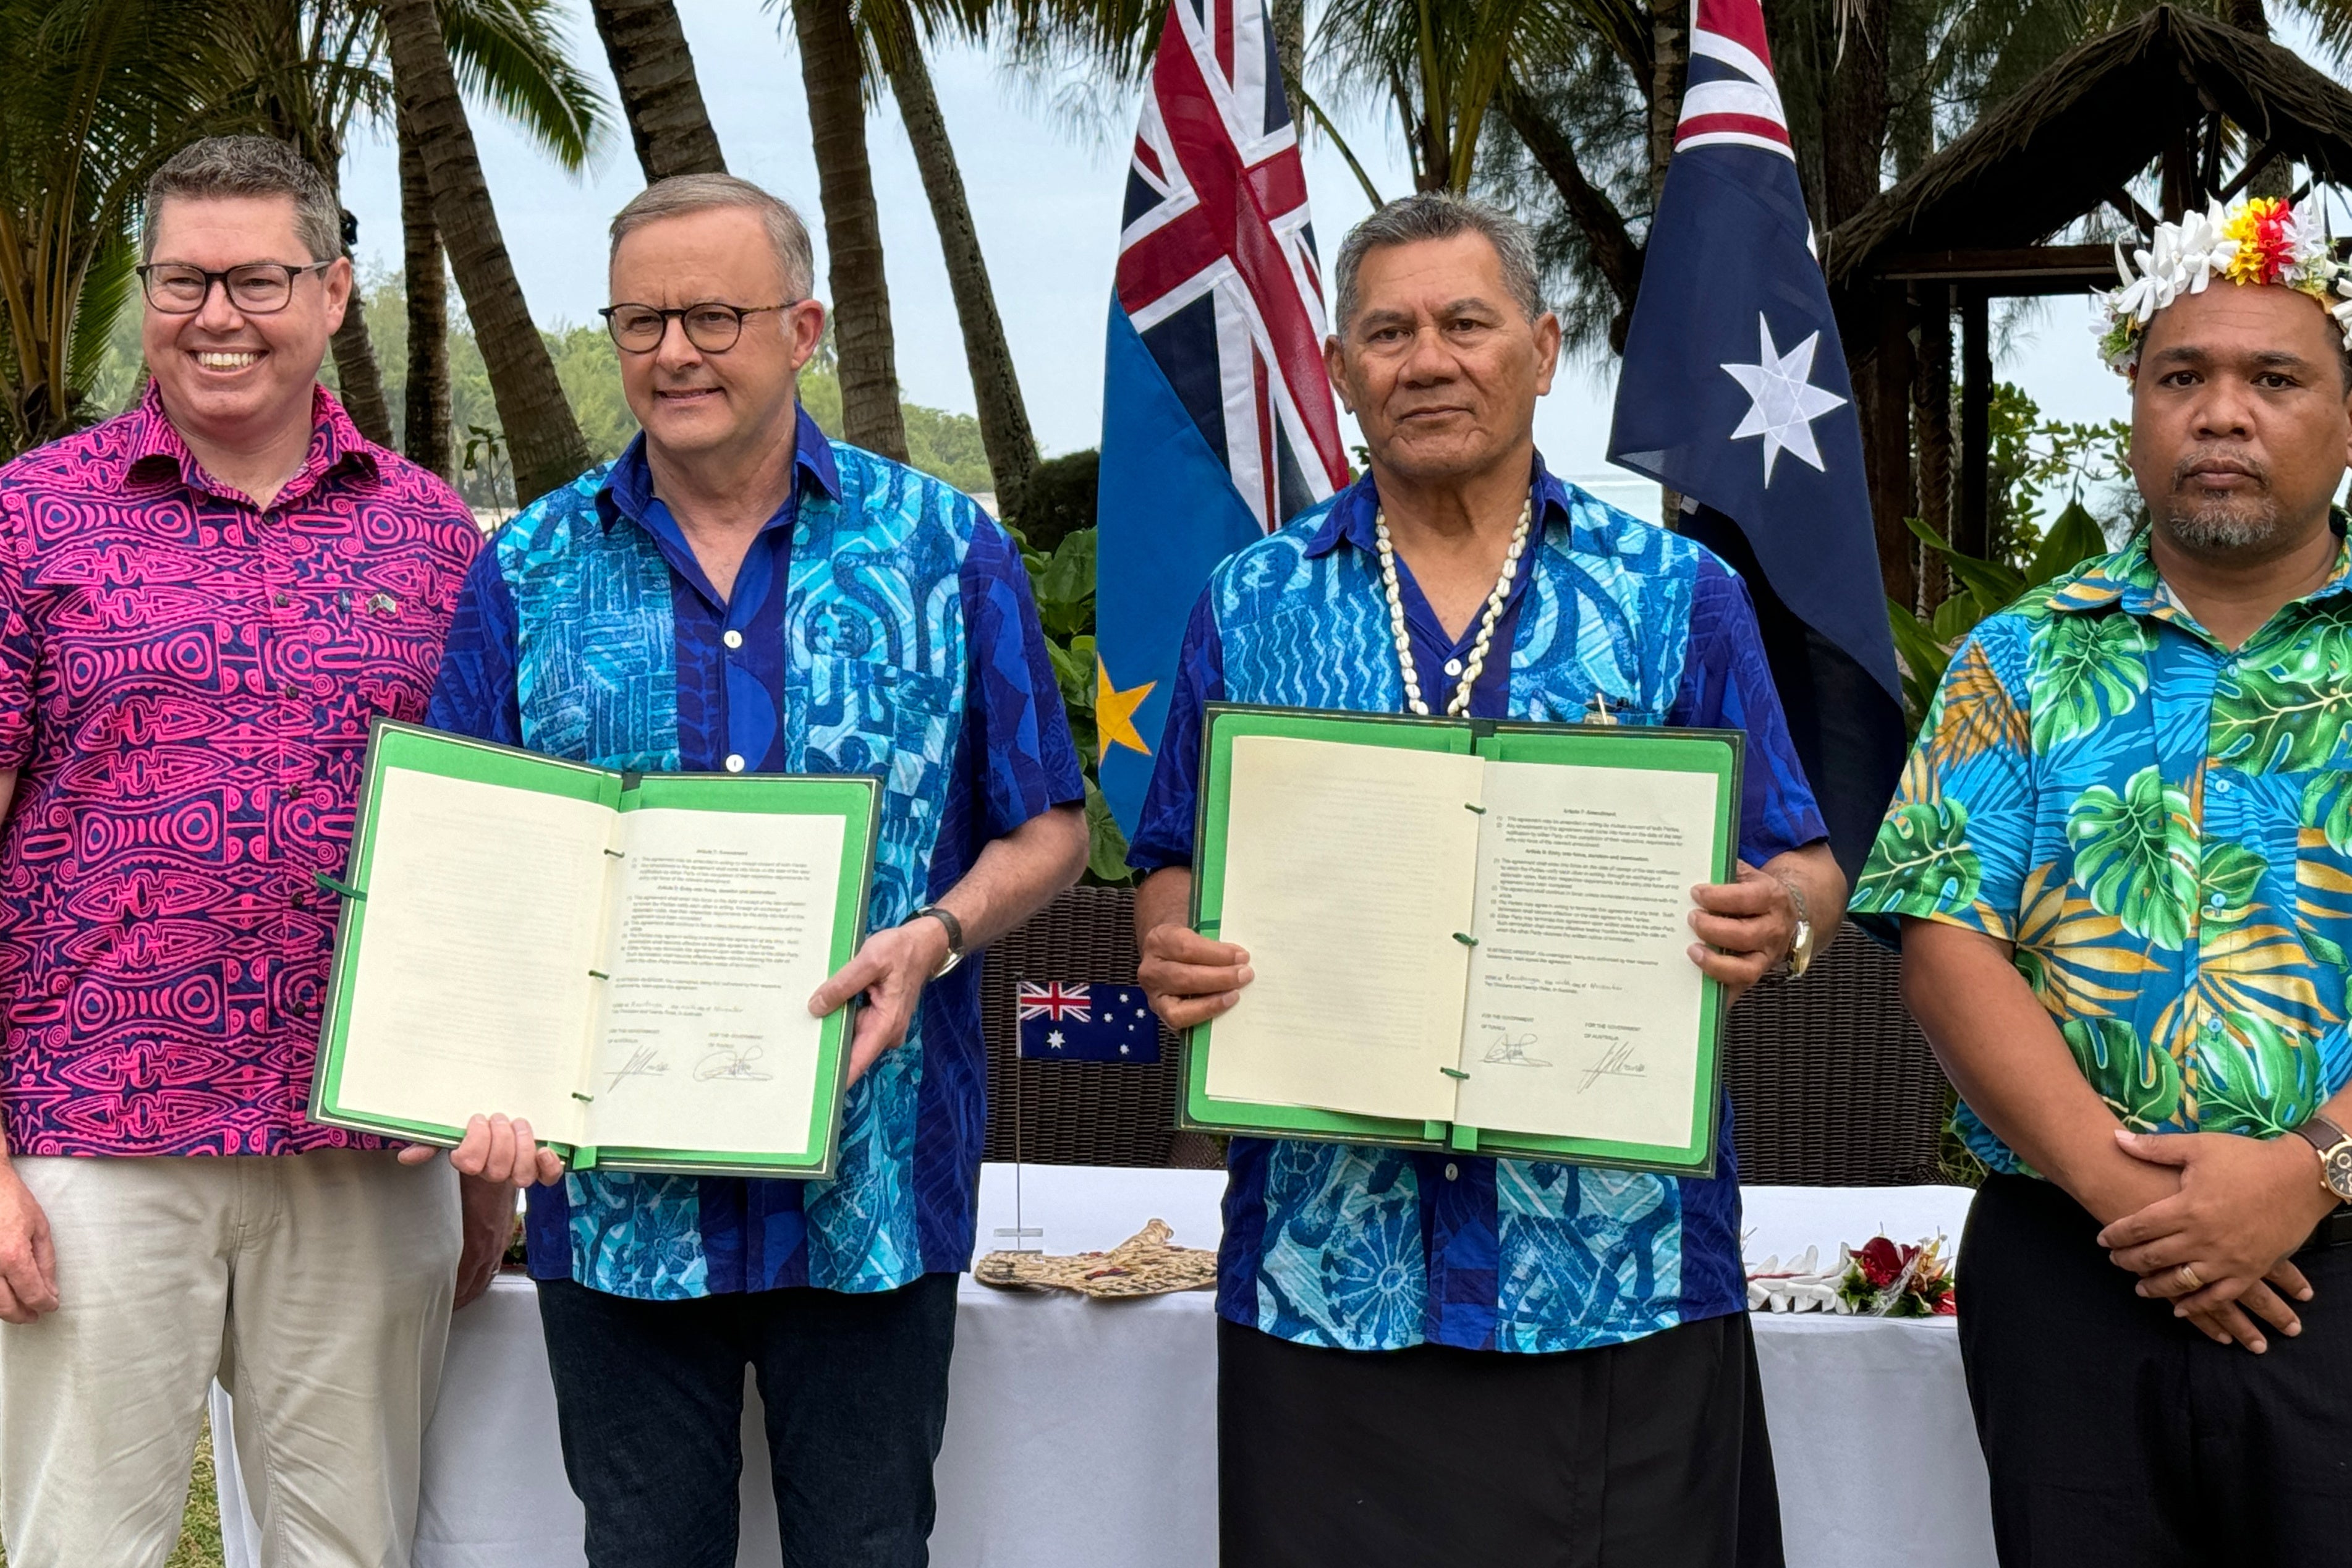 Australian Prime Minister Anthony Albanese and Tuvalu Prime Minister Kausea Natano display a compact between the two nations at the Pacific Resort, Rarotonga, the Cook Island